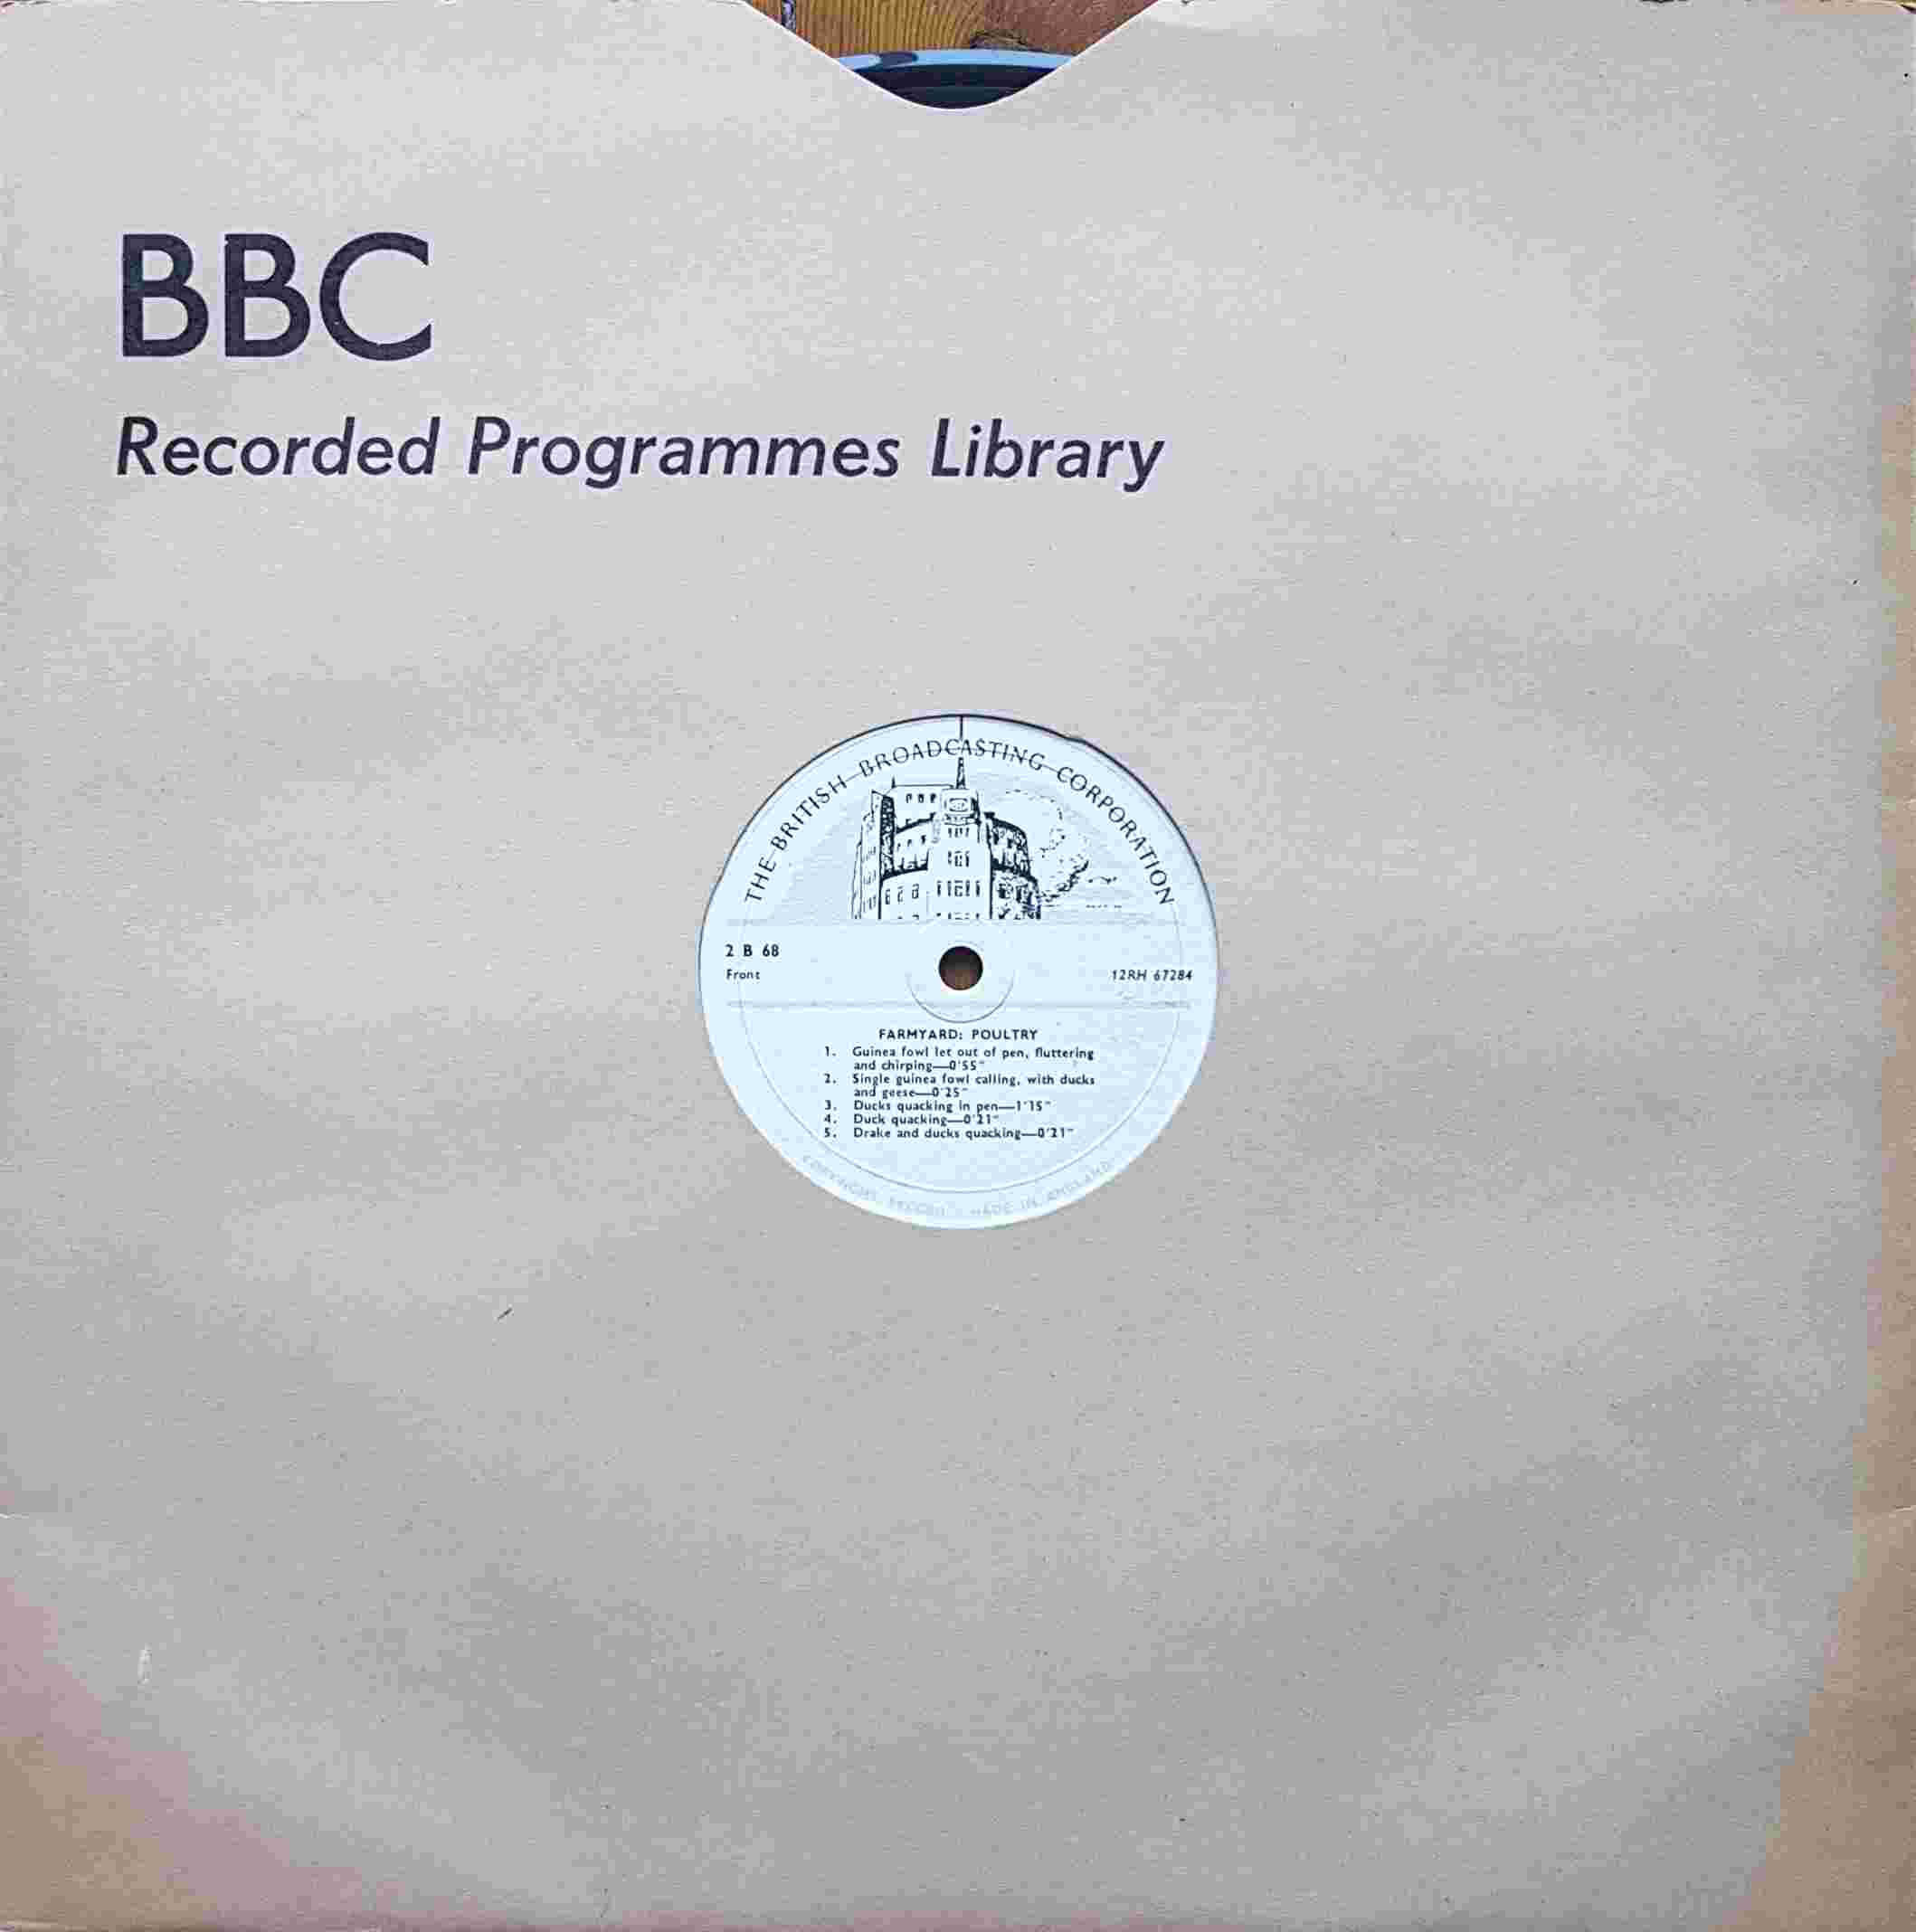 Picture of 2 B 68 Farmyard: Poultry by artist Not registered from the BBC 78 - Records and Tapes library